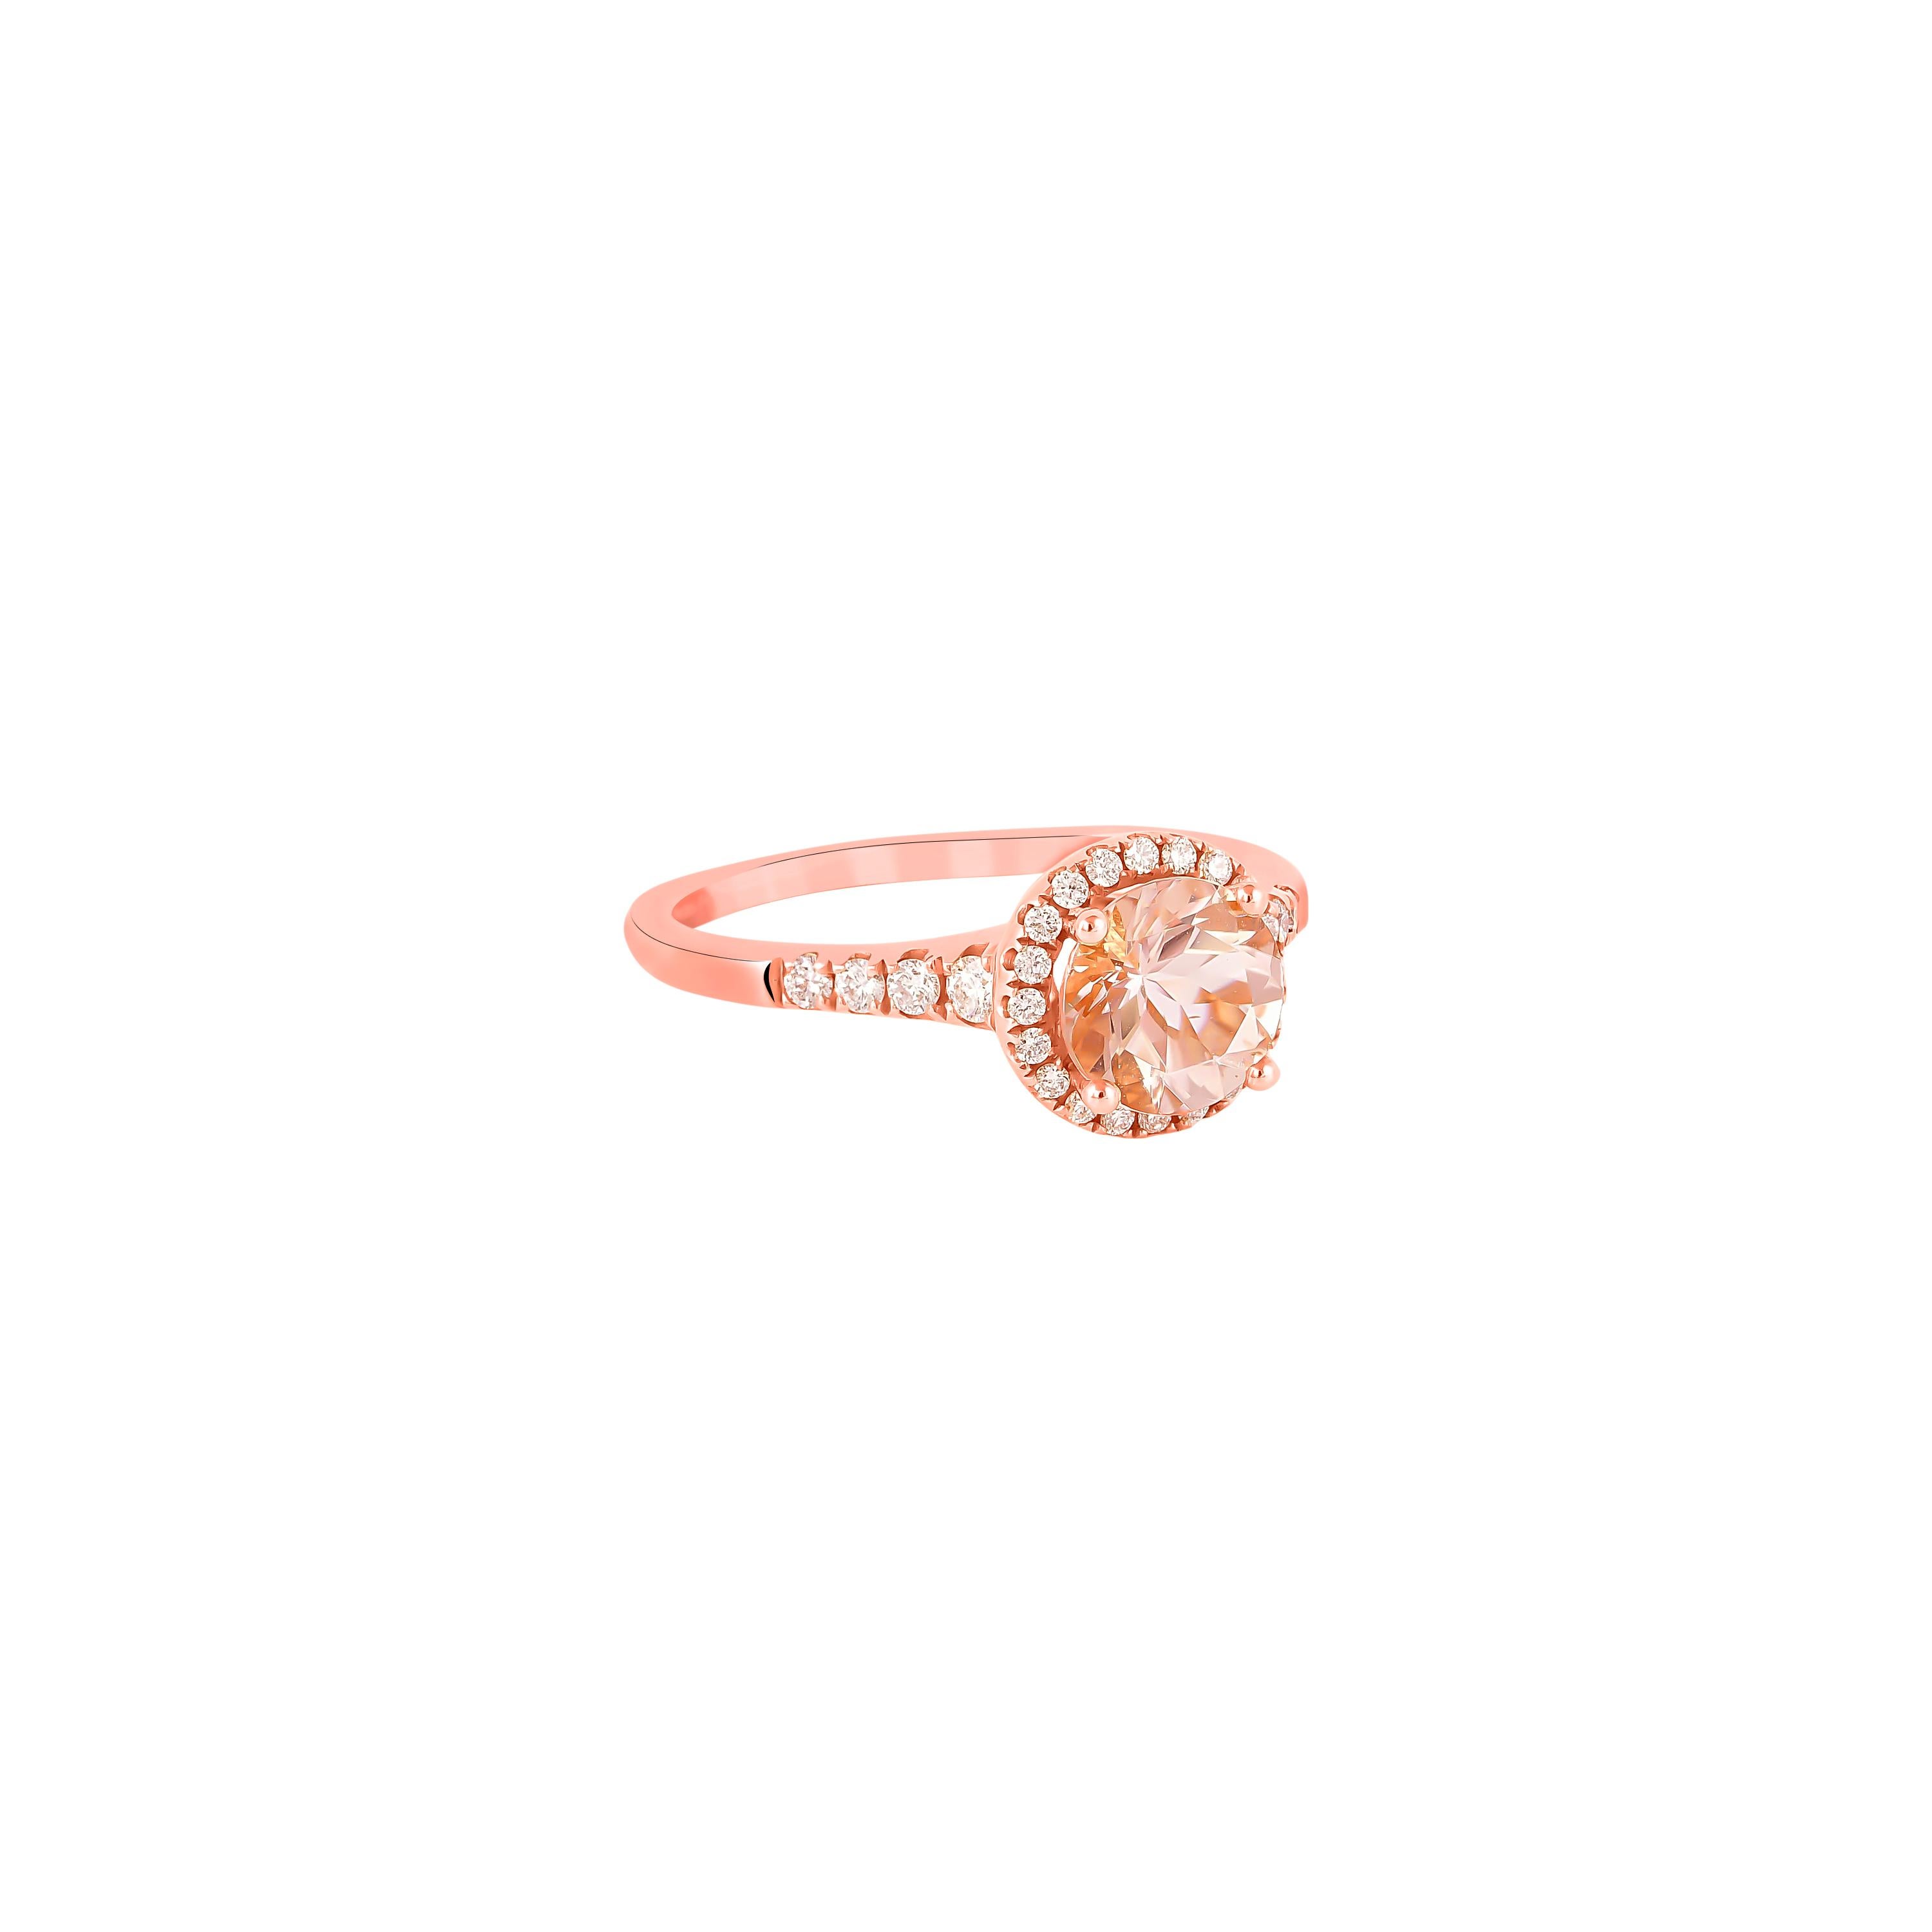 This collection features an array of magnificent morganites! Accented with diamonds these rings are made in rose gold and present a classic yet elegant look. 

Classic morganite ring in 18K rose gold with diamonds. 

Morganite: 1.1 carat round